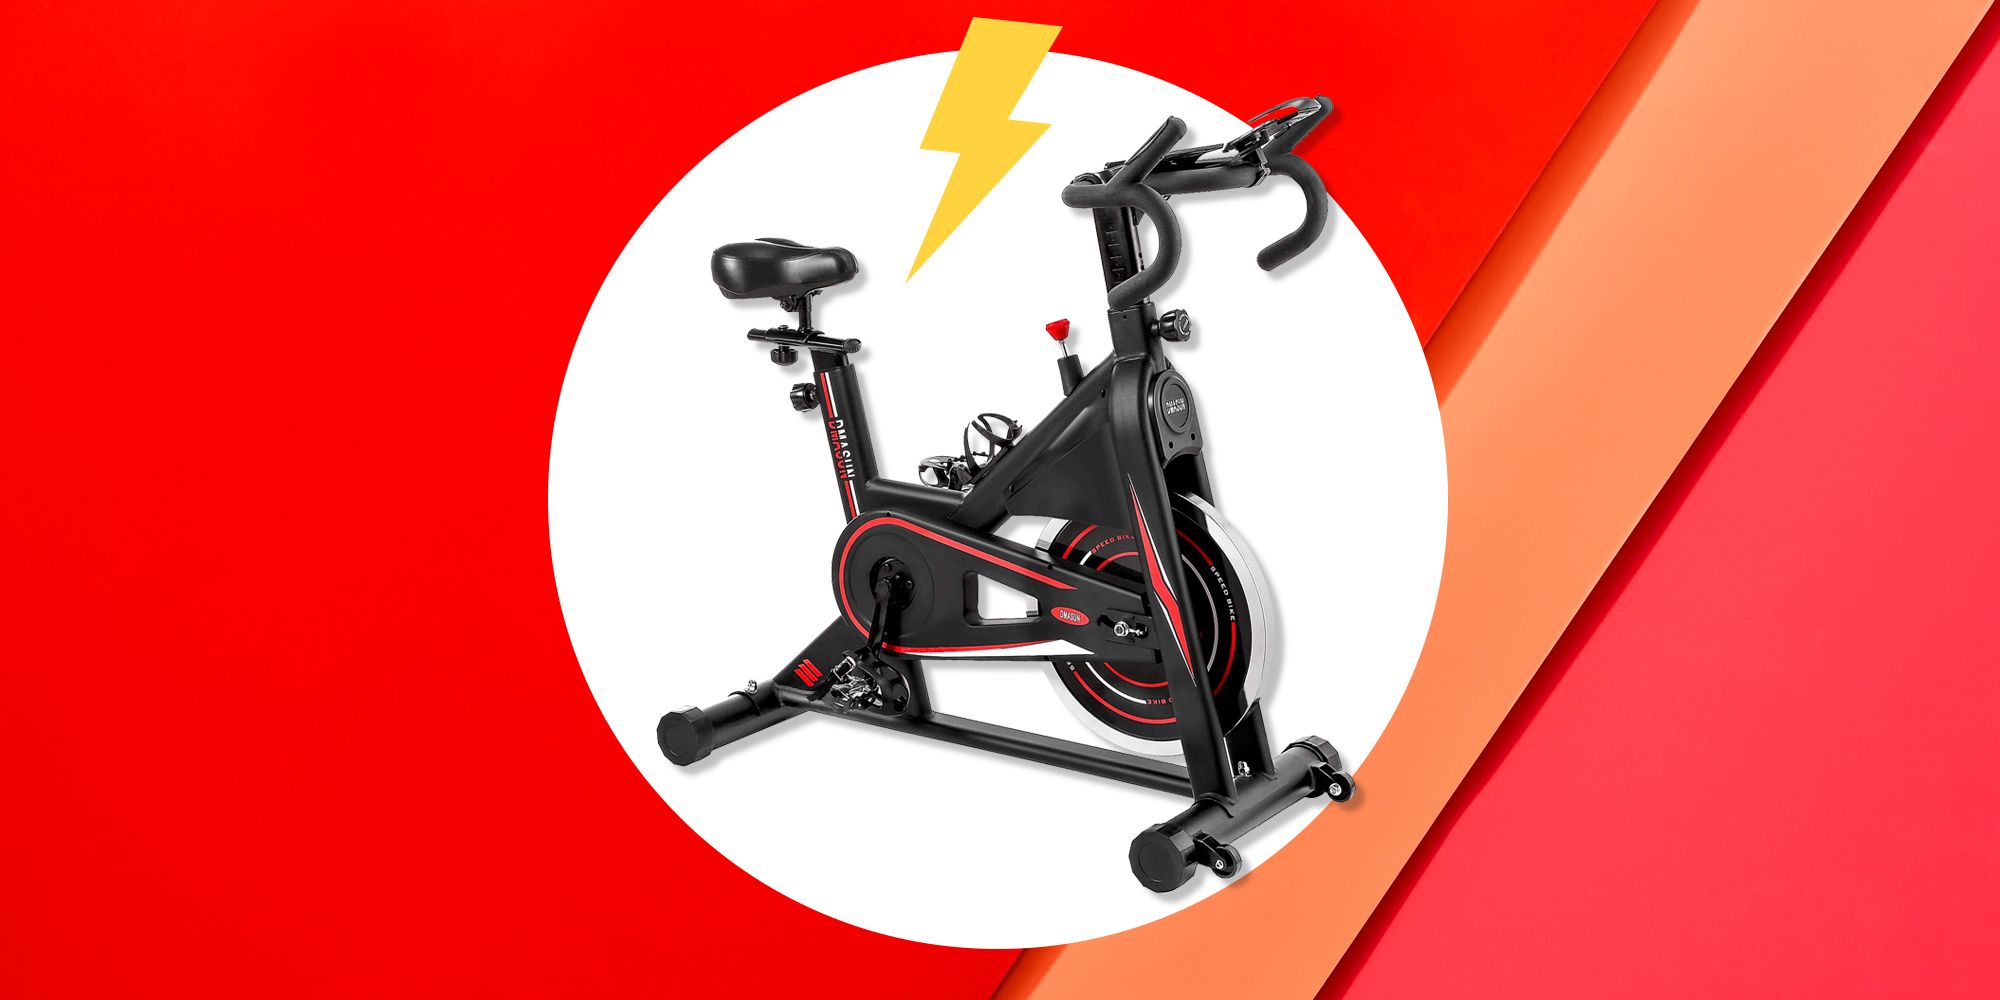 Bicycle Cycling Fitness Gym Stationary Exercise Bike Workout Machine Home Indoor 